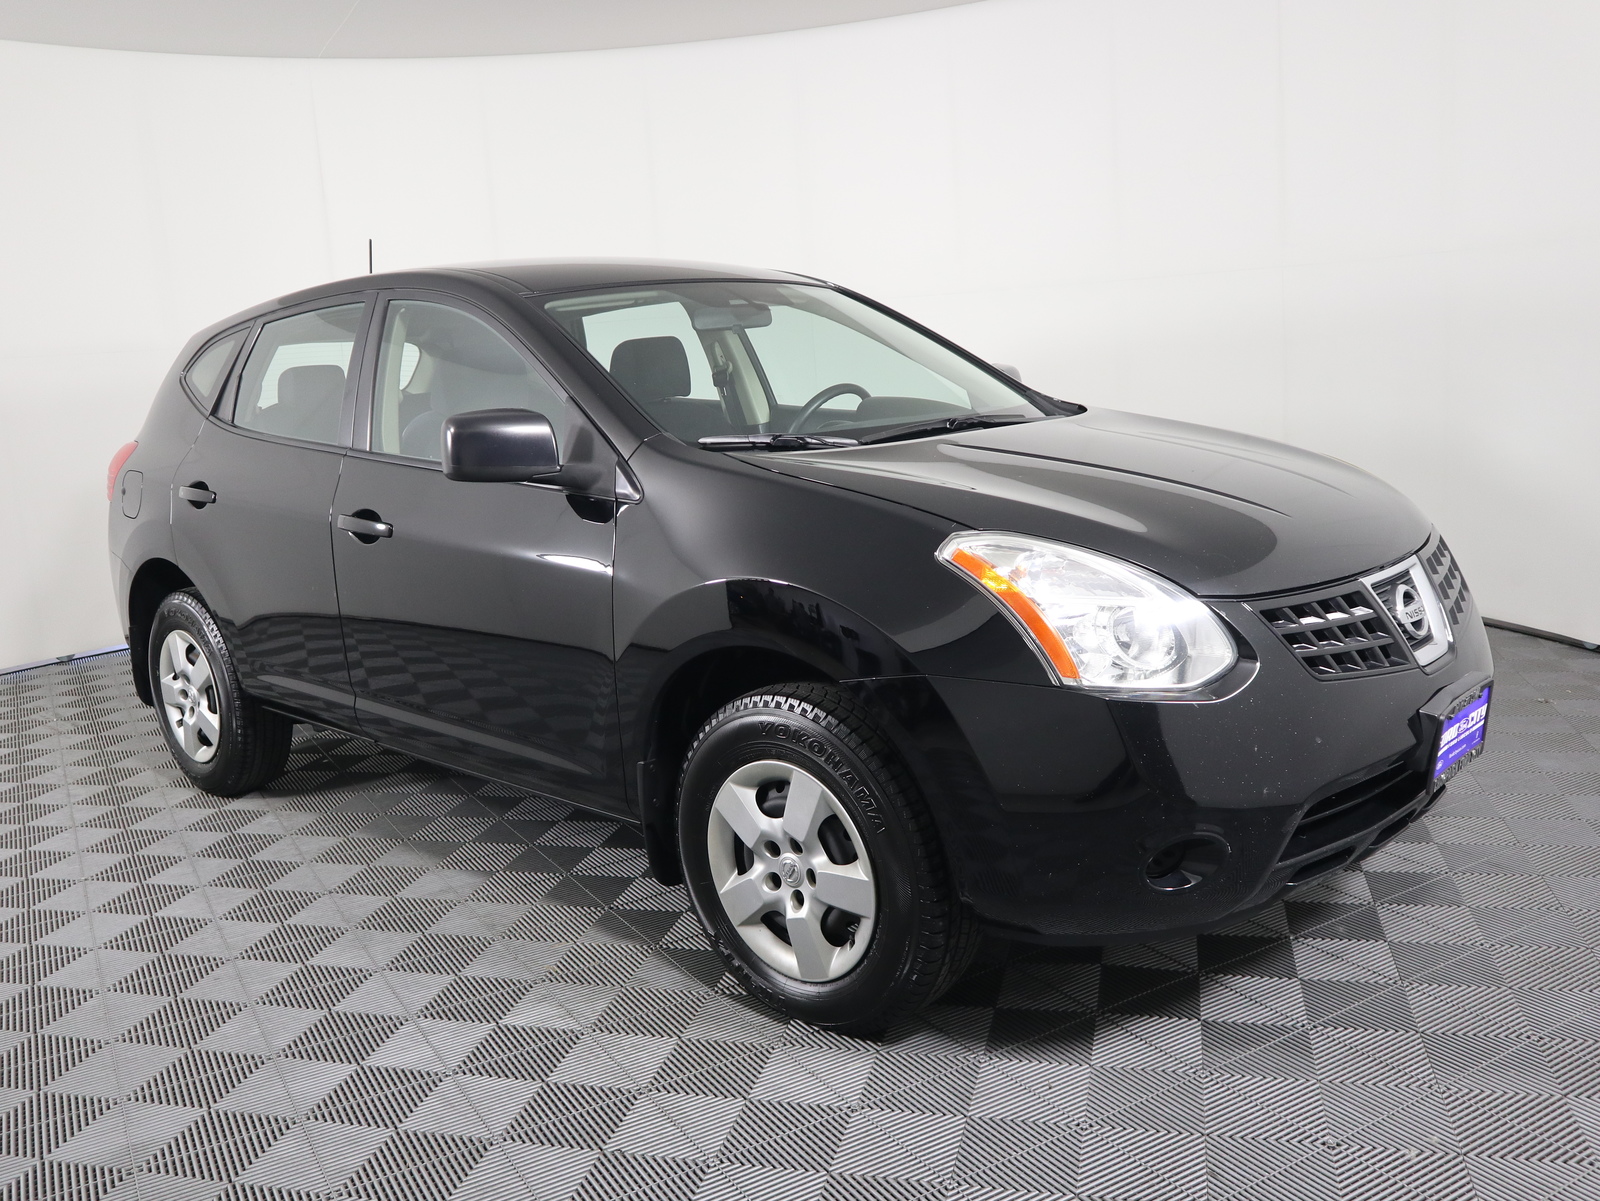 Pre Owned 2008 Nissan Rogue FWD 4dr S Sport Utility in Savoy F20022A 